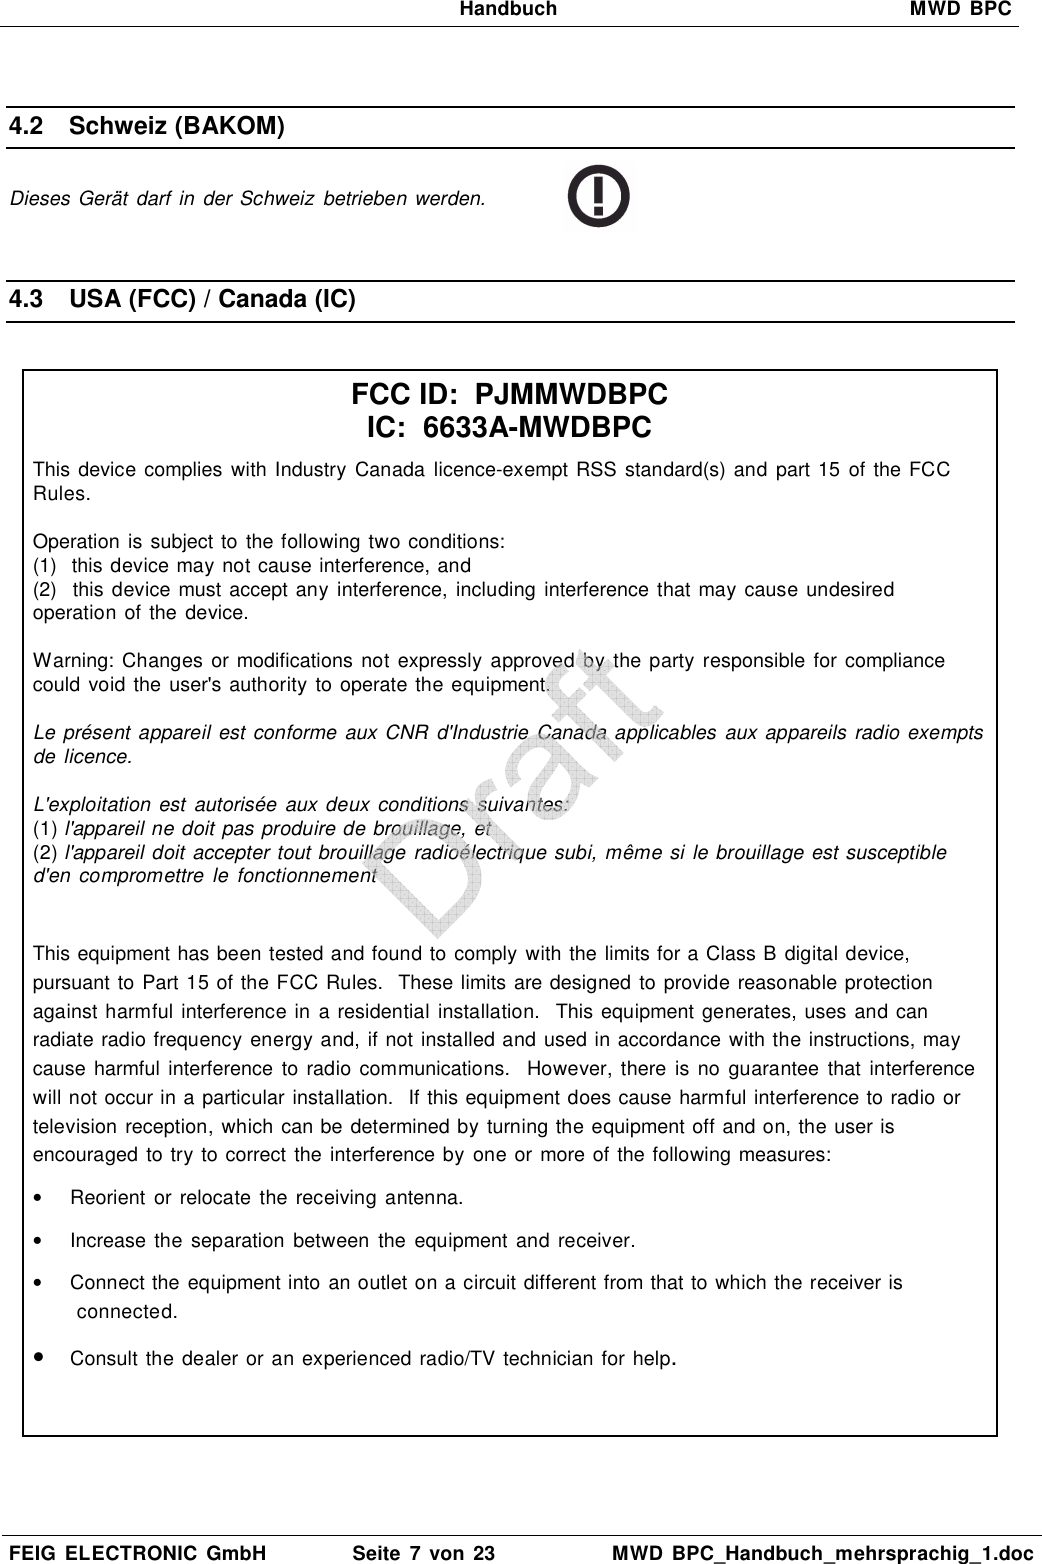   Handbuch  MWD  BPC  FEIG  ELECTRONIC  GmbH  Seite  7 von 23  MWD  BPC_Handbuch_mehrsprachig_1.doc   4.2  Schweiz (BAKOM) Dieses Gerät  darf  in  der Schweiz  betrieben werden.   4.3  USA (FCC) / Canada (IC)   FCC ID:  PJMMWDBPC IC:  6633A-MWDBPC This device complies  with Industry Canada licence-exempt RSS  standard(s) and part 15 of the FCC Rules.  Operation  is subject to  the following two conditions: (1)  this device may not cause interference, and (2)  this device must accept any interference, including  interference that may cause undesired operation of the  device.  Warning:  Changes  or modifications  not expressly  approved  by  the party responsible for compliance could  void the user&apos;s authority to operate the equipment.  Le présent  appareil est conforme aux CNR  d&apos;Industrie Canada applicables  aux appareils radio exempts de licence.  L&apos;exploitation  est  autorisée  aux  deux conditions suivantes: (1) l&apos;appareil ne doit pas produire de brouillage, et (2) l&apos;appareil doit accepter tout brouillage radioélectrique subi, même si le brouillage est susceptible d&apos;en compromettre  le  fonctionnement  This equipment has been tested and found to comply with the limits for a Class B digital device, pursuant to Part 15 of the FCC Rules.  These limits are designed to provide reasonable protection against harmful interference in a residential installation.  This equipment generates, uses and can radiate radio frequency energy and, if not installed and used in accordance with the instructions, may cause  harmful interference  to  radio communications.   However, there  is  no  guarantee  that interference will not occur in a particular installation.  If this equipment does cause harmful interference to radio or television reception, which can be determined by turning the equipment off and on, the user is encouraged  to try to correct the interference by  one or more of the following measures: •  Reorient  or  relocate  the receiving antenna. •  Increase  the  separation  between  the  equipment  and receiver. •  Connect the equipment into an outlet on a circuit different from that to which the receiver is connected. • Consult the dealer or an experienced radio/TV technician for help.   